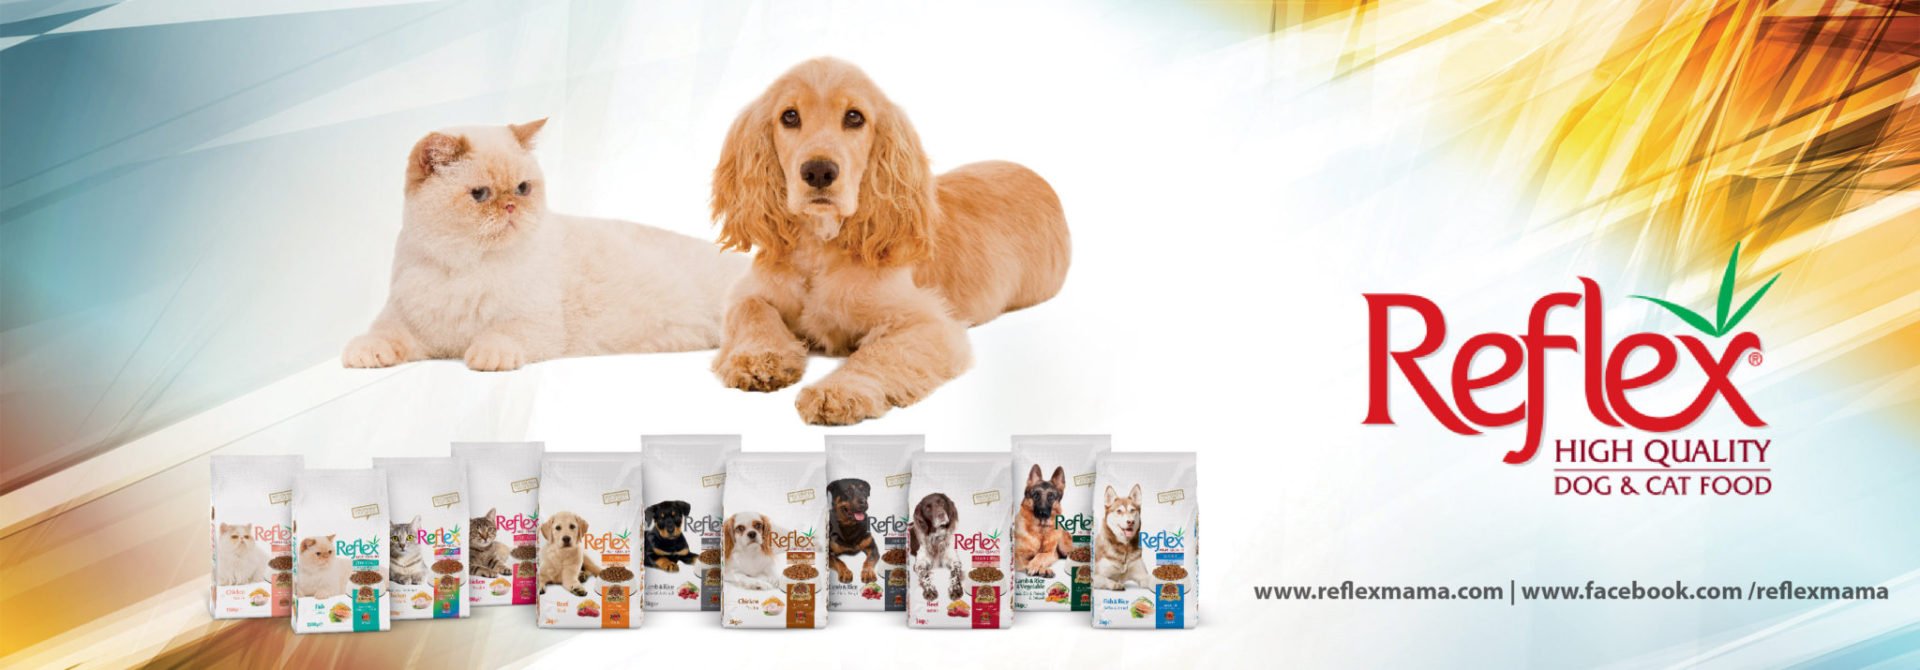 Reflex pet food Pakistan for adult kitten dog and puppies